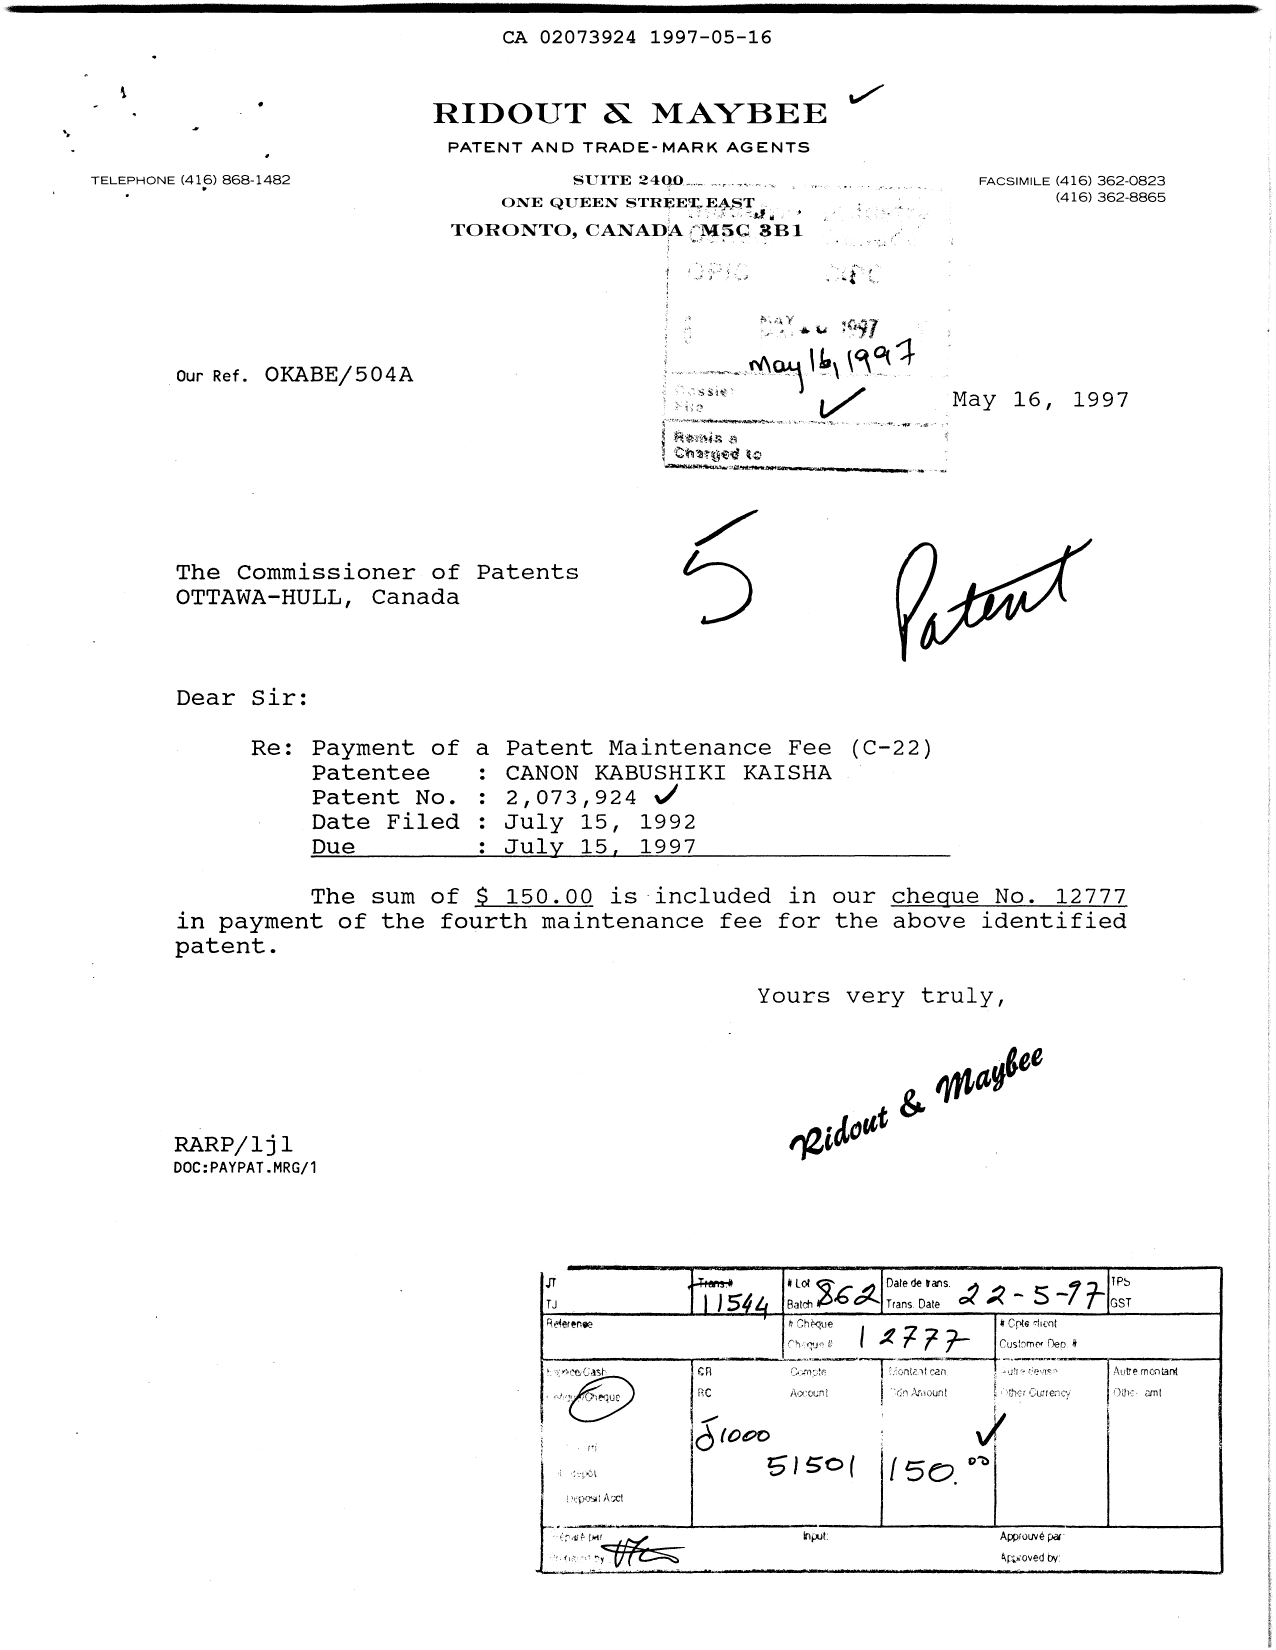 Canadian Patent Document 2073924. Fees 19961216. Image 1 of 1